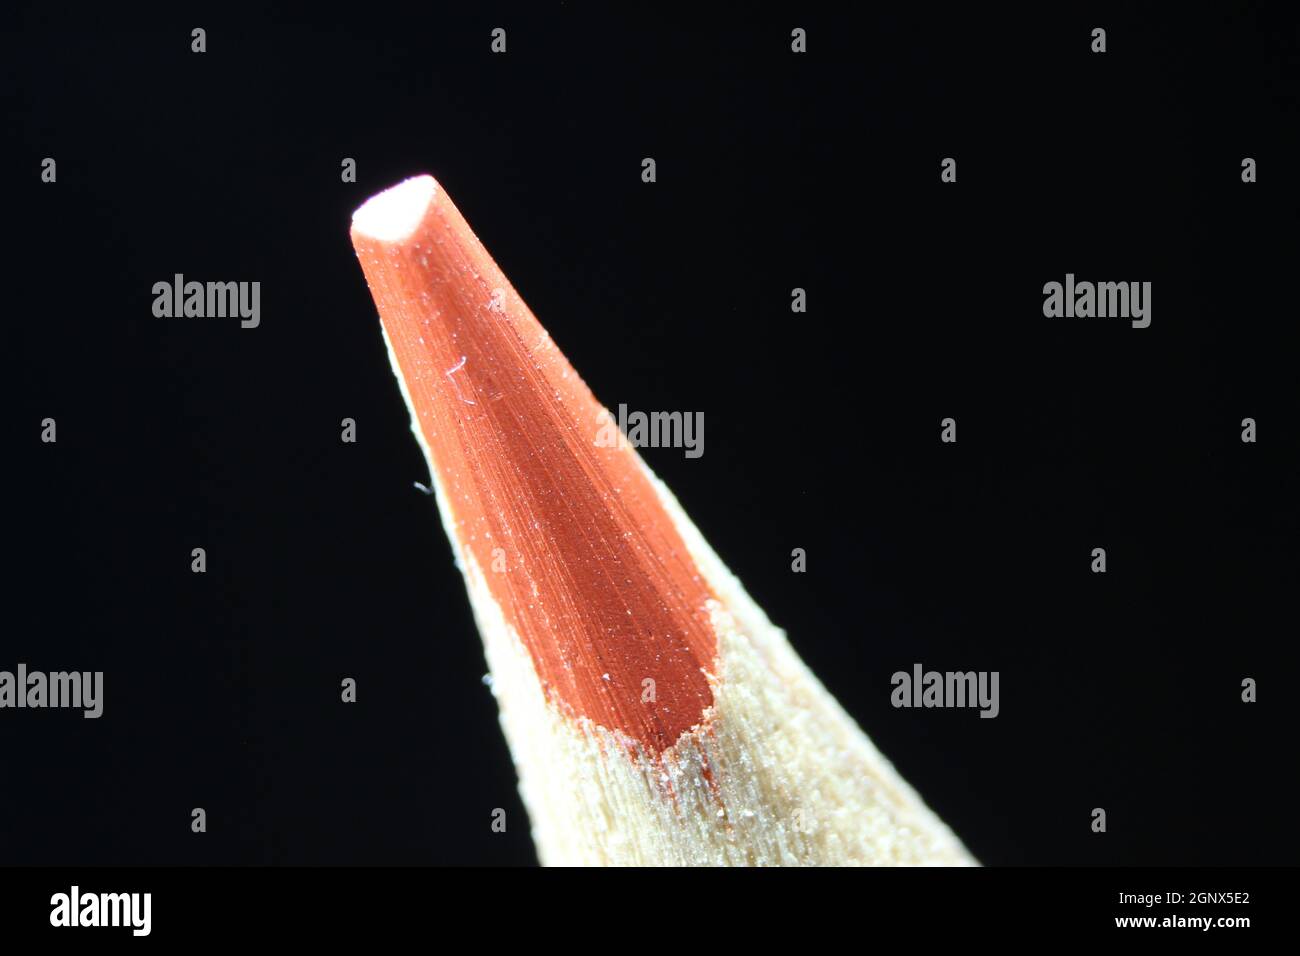 close up of sharpened pencil.Macro view of the tip of the pencil on a black background. Stock Photo